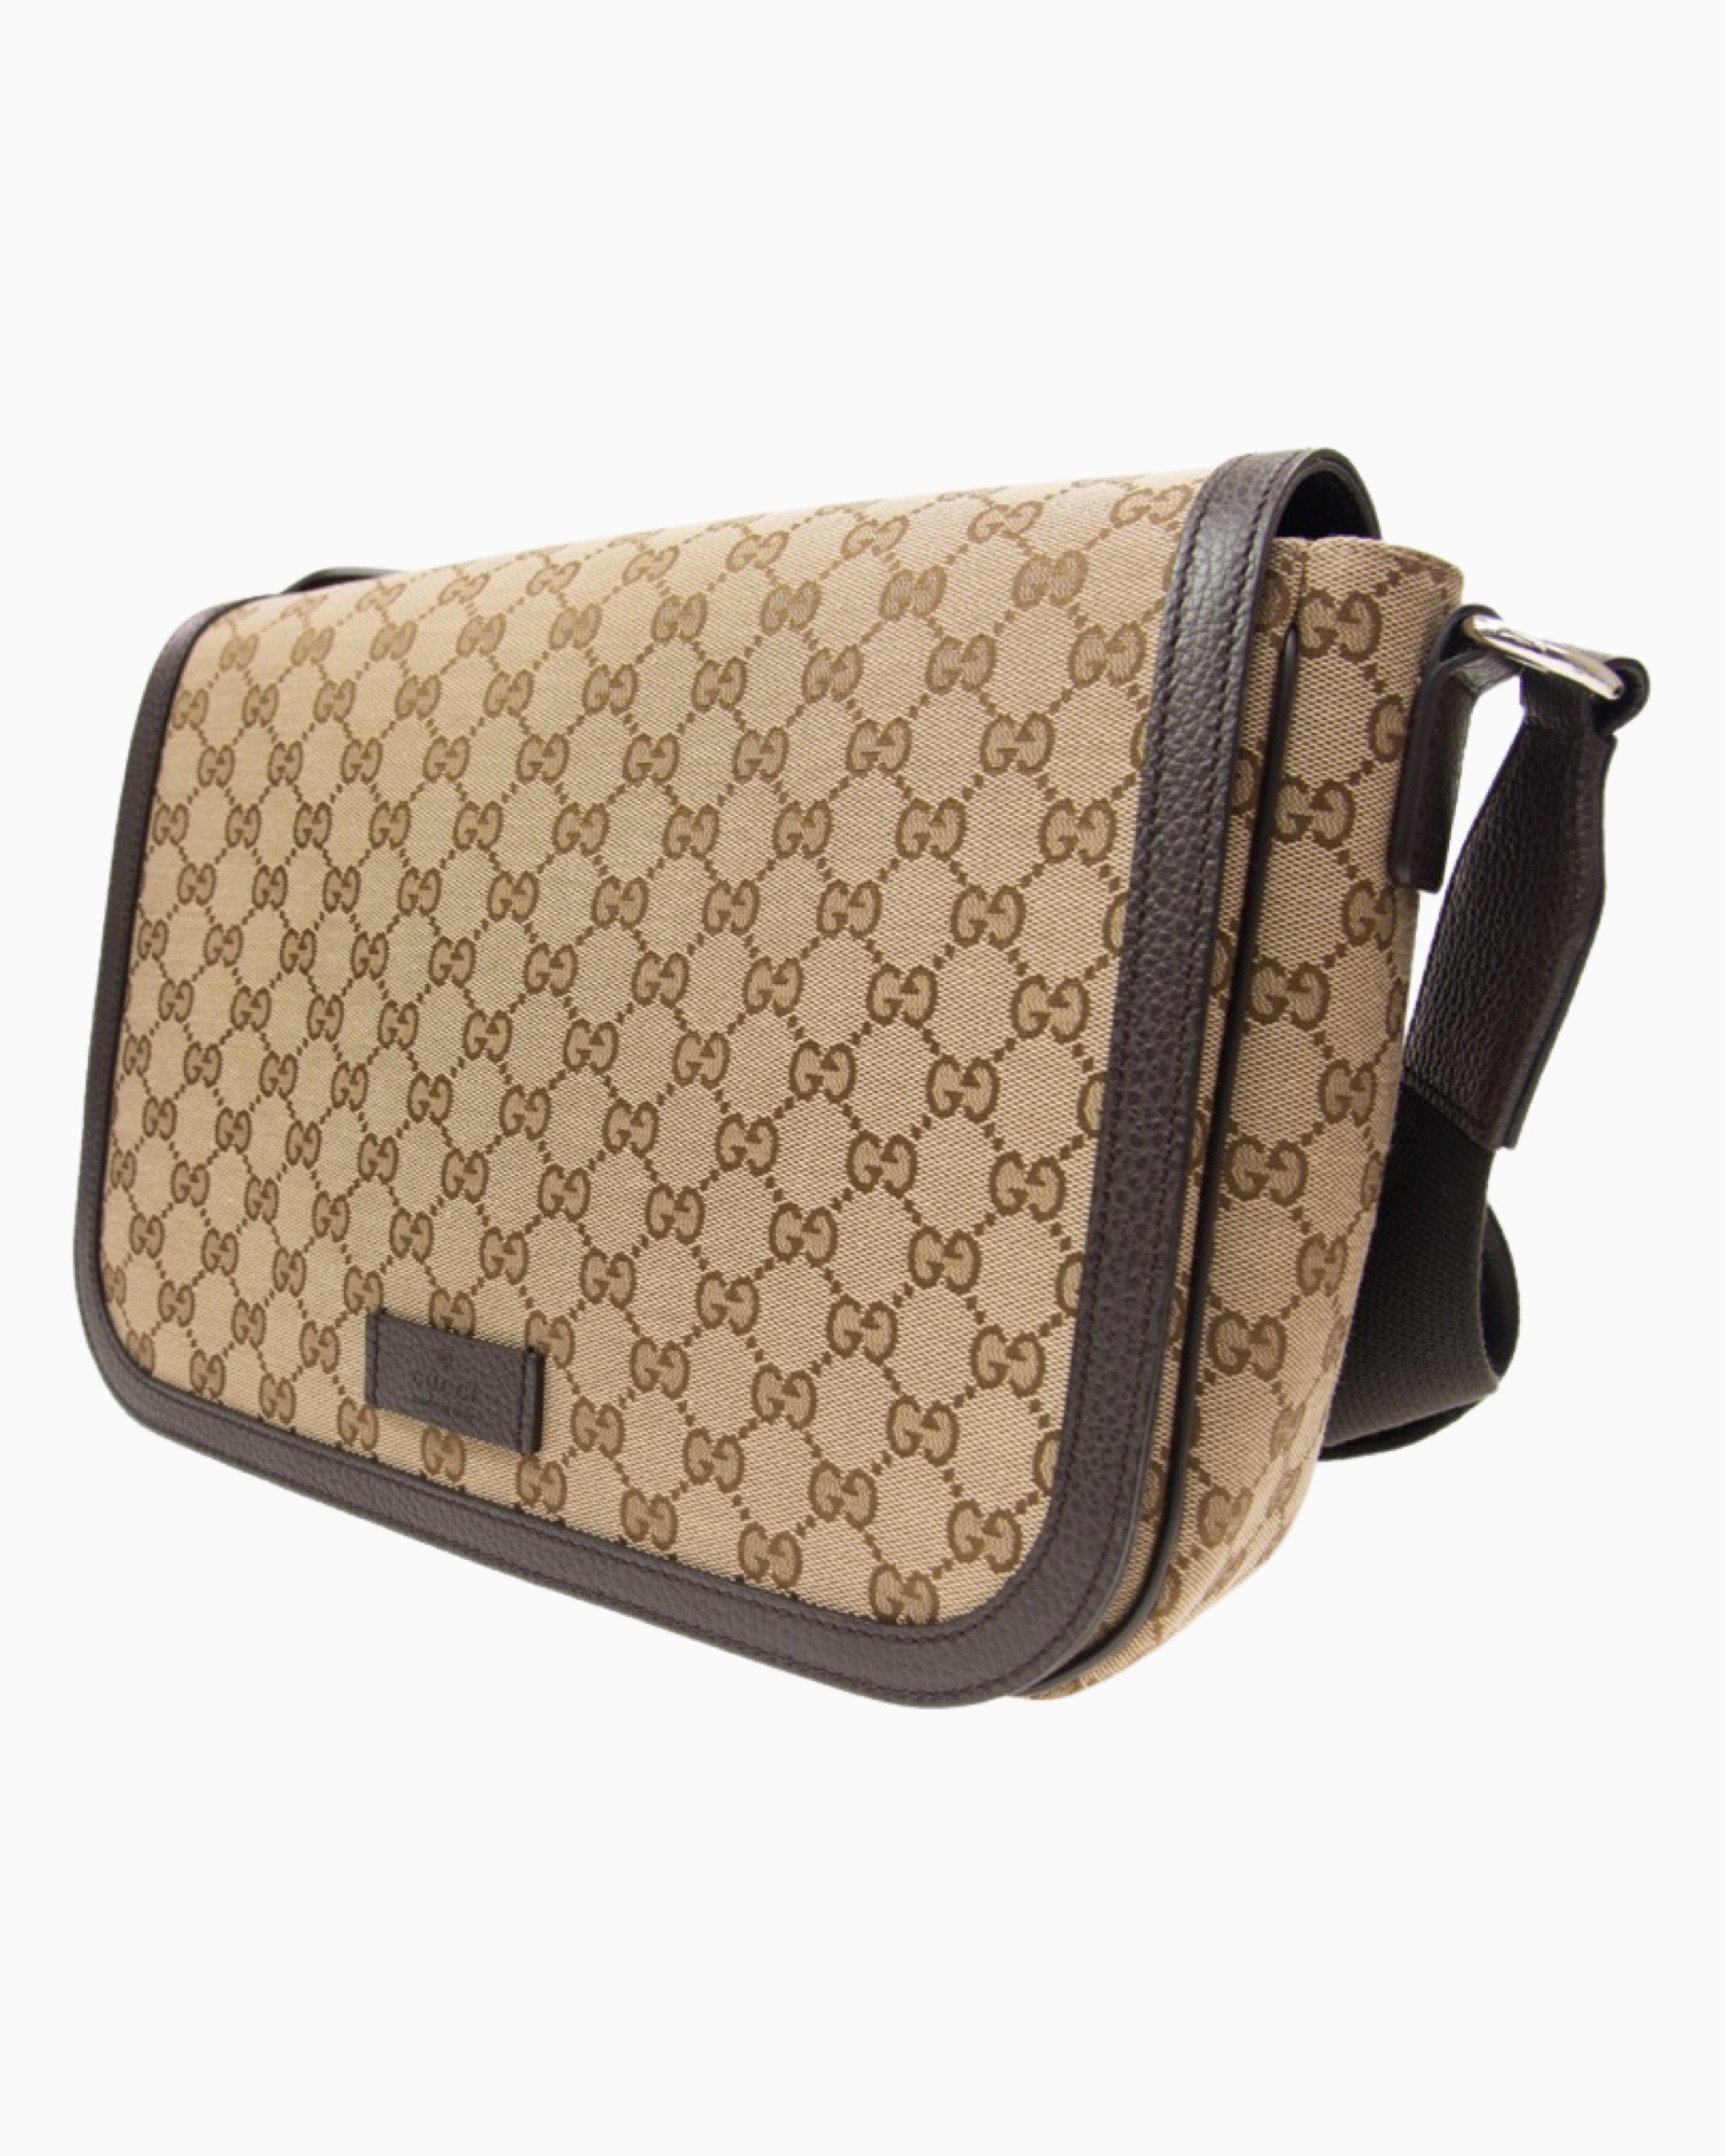 Gucci Messenger Bag GG Canvas Brown Leather